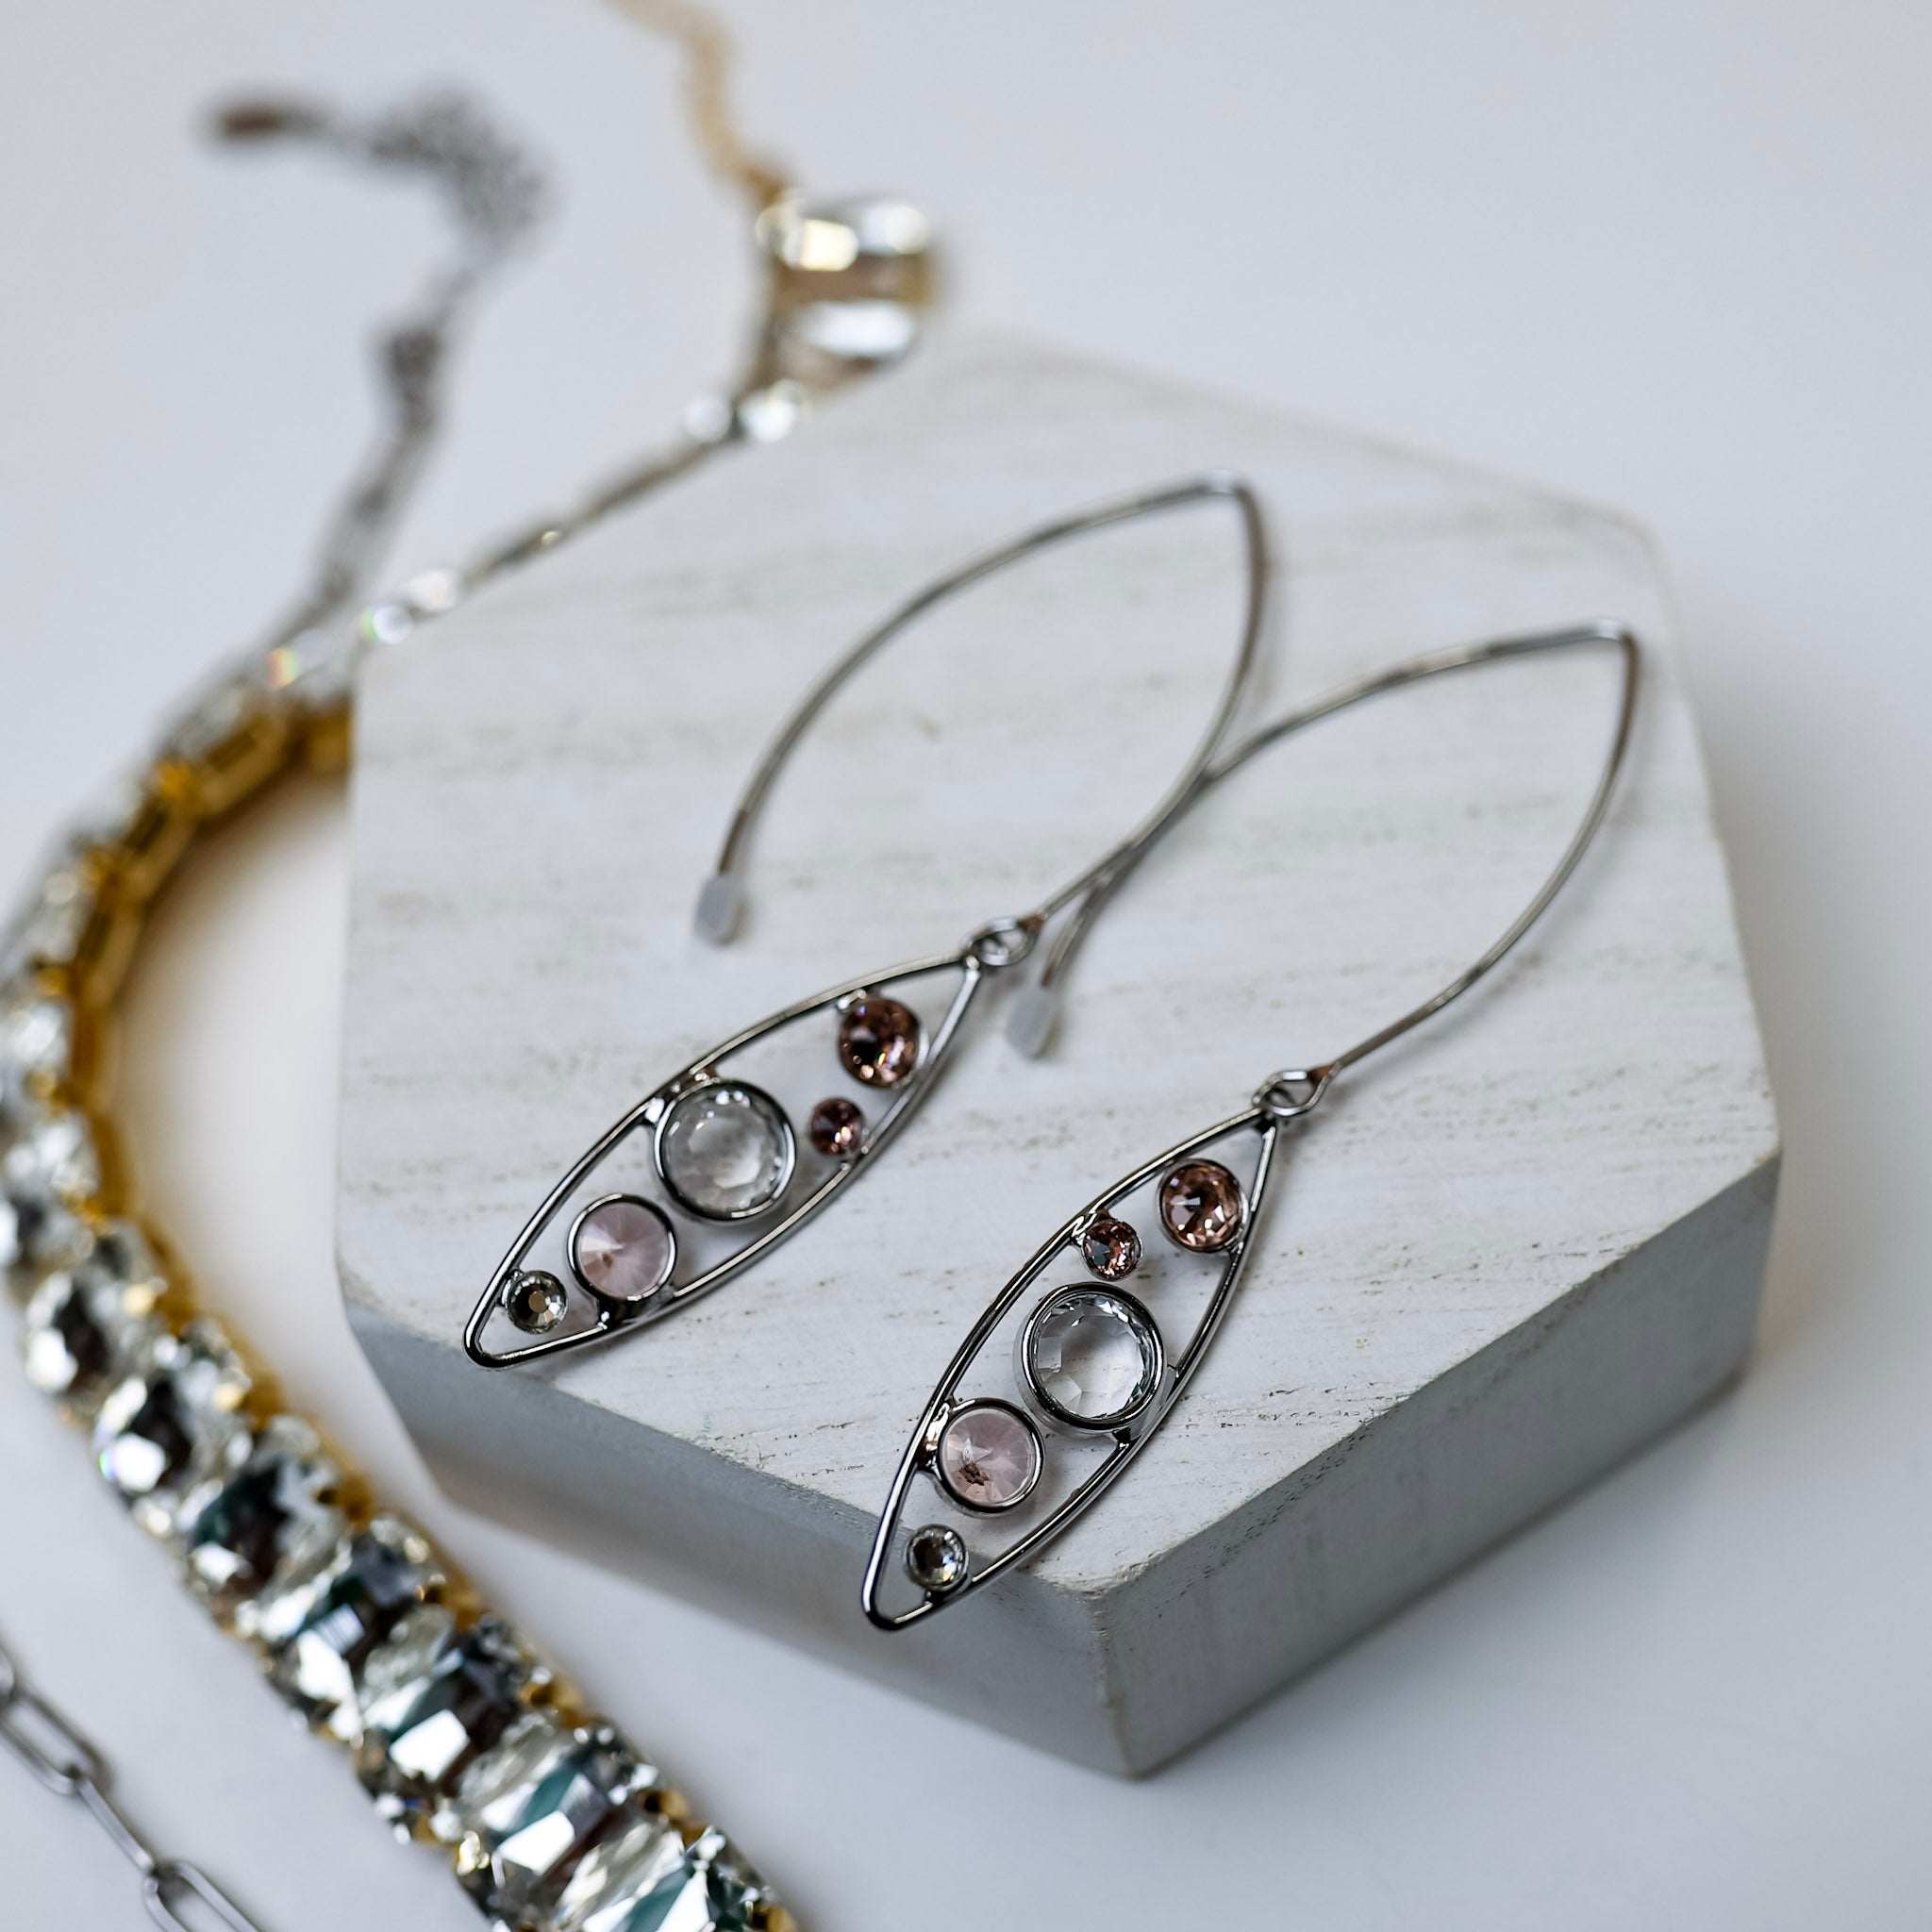 A pair of silver-tone dangle earrings with an oval outline and crystals.